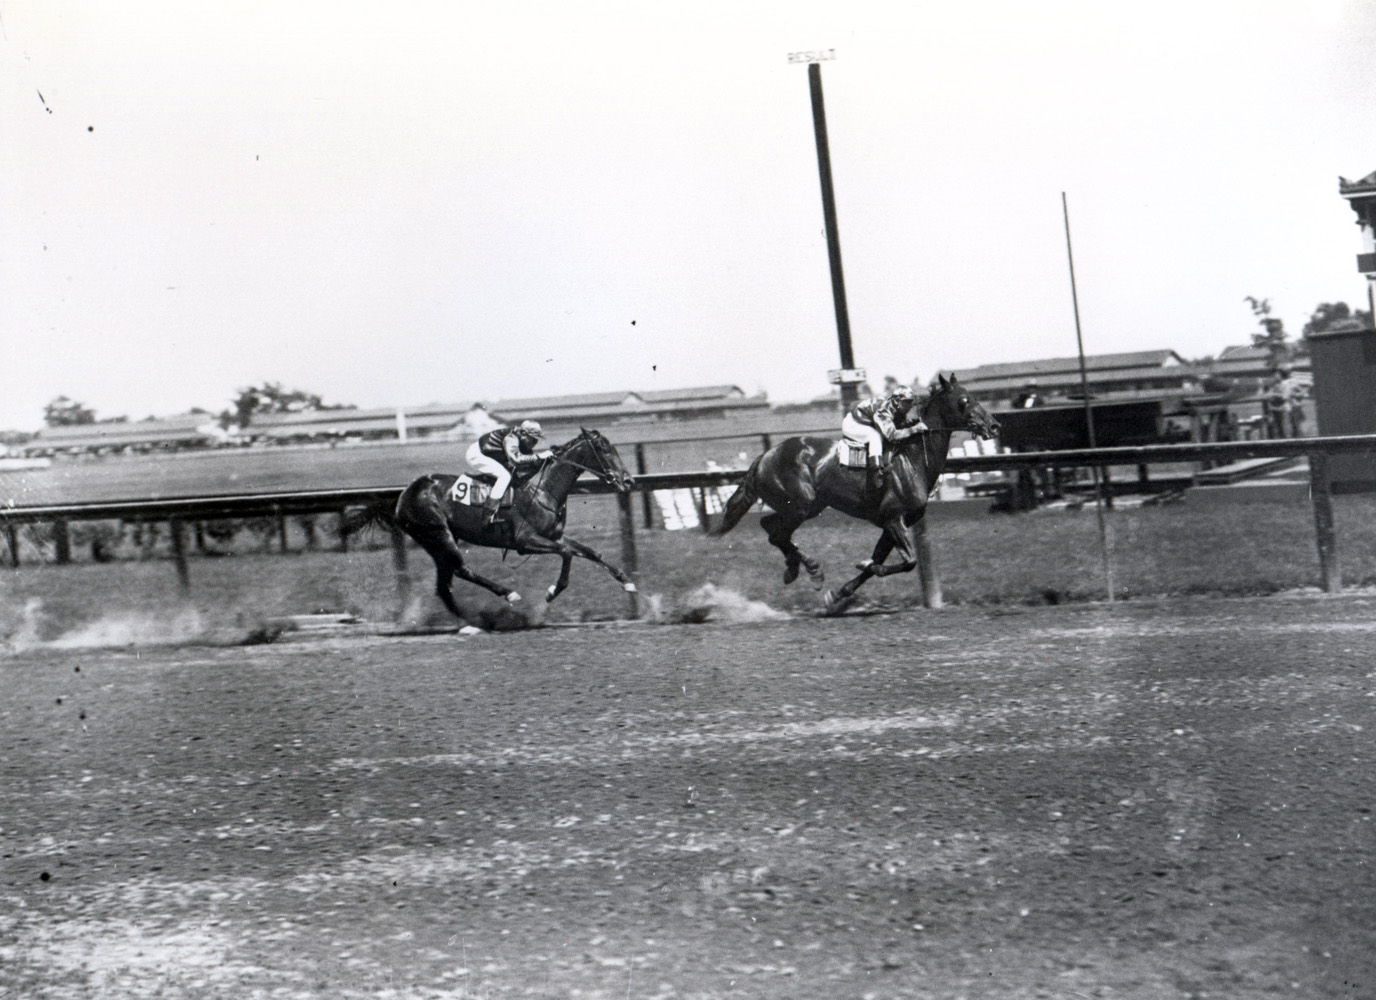 Joe Notter and Roseben winning the Sysonby Handicap at Sheepshead Bay, June 1908 (Keeneland Library Cook Collection/Museum Collection)